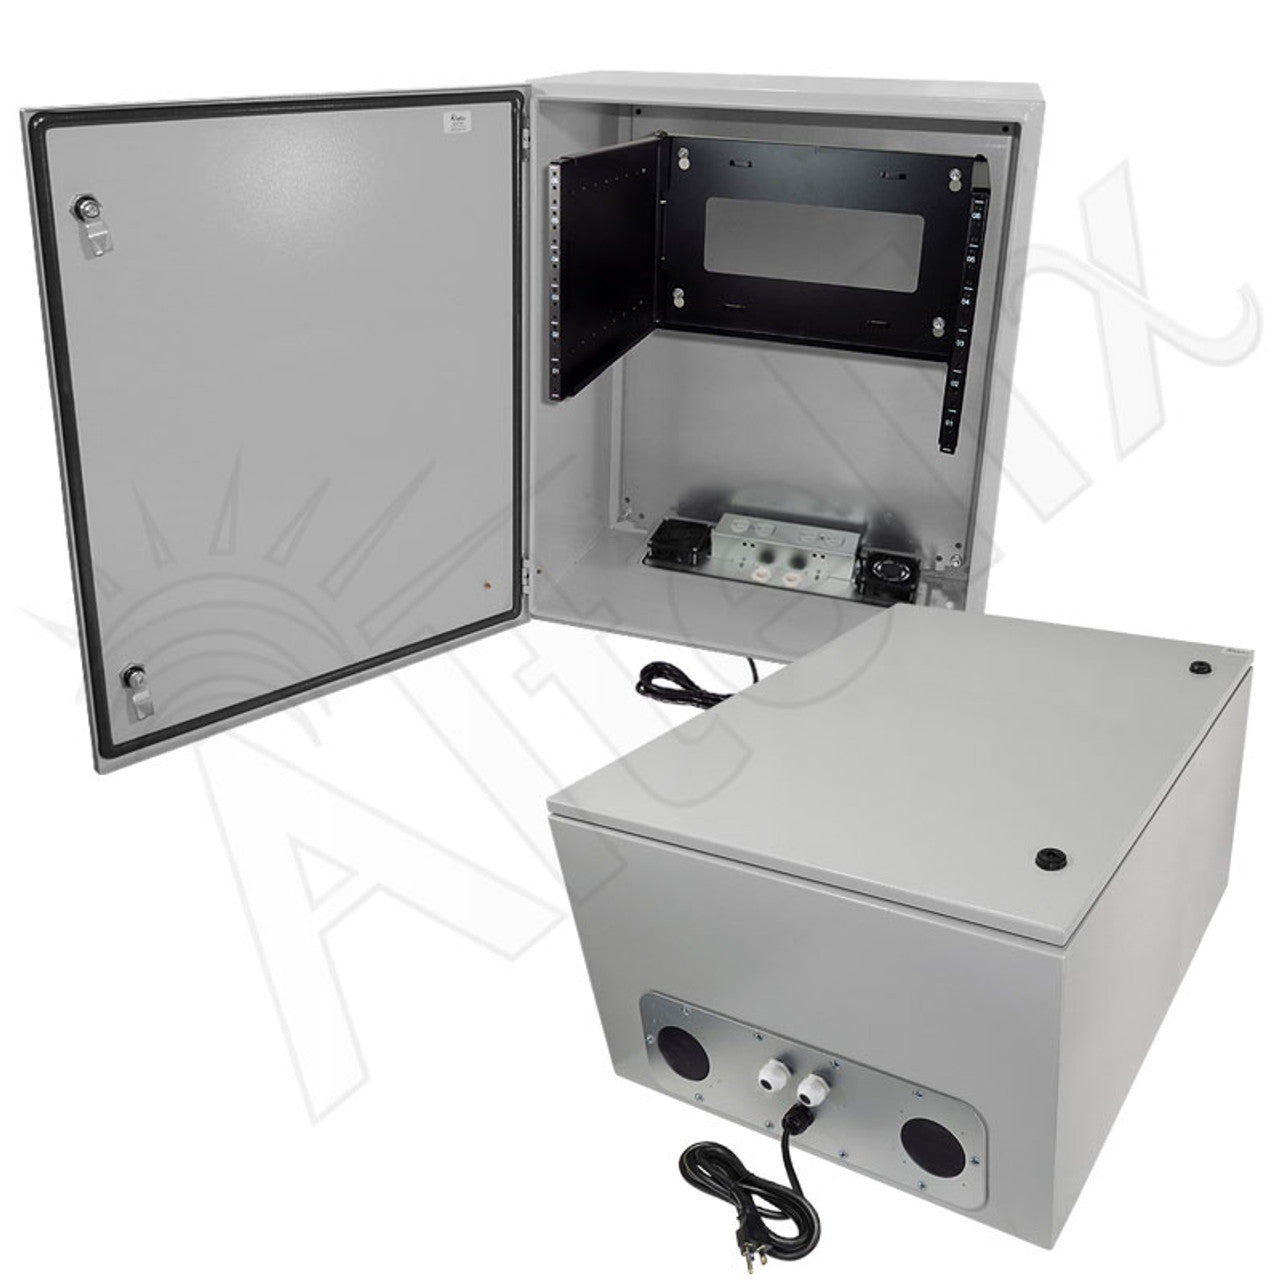 Altelix 120VAC 20A Steel NEMA Enclosure for UPS Power Systems with 19" Wide 6U Rack, Dual Cooling Fans, 20A Power Outlets & Power Cord-5